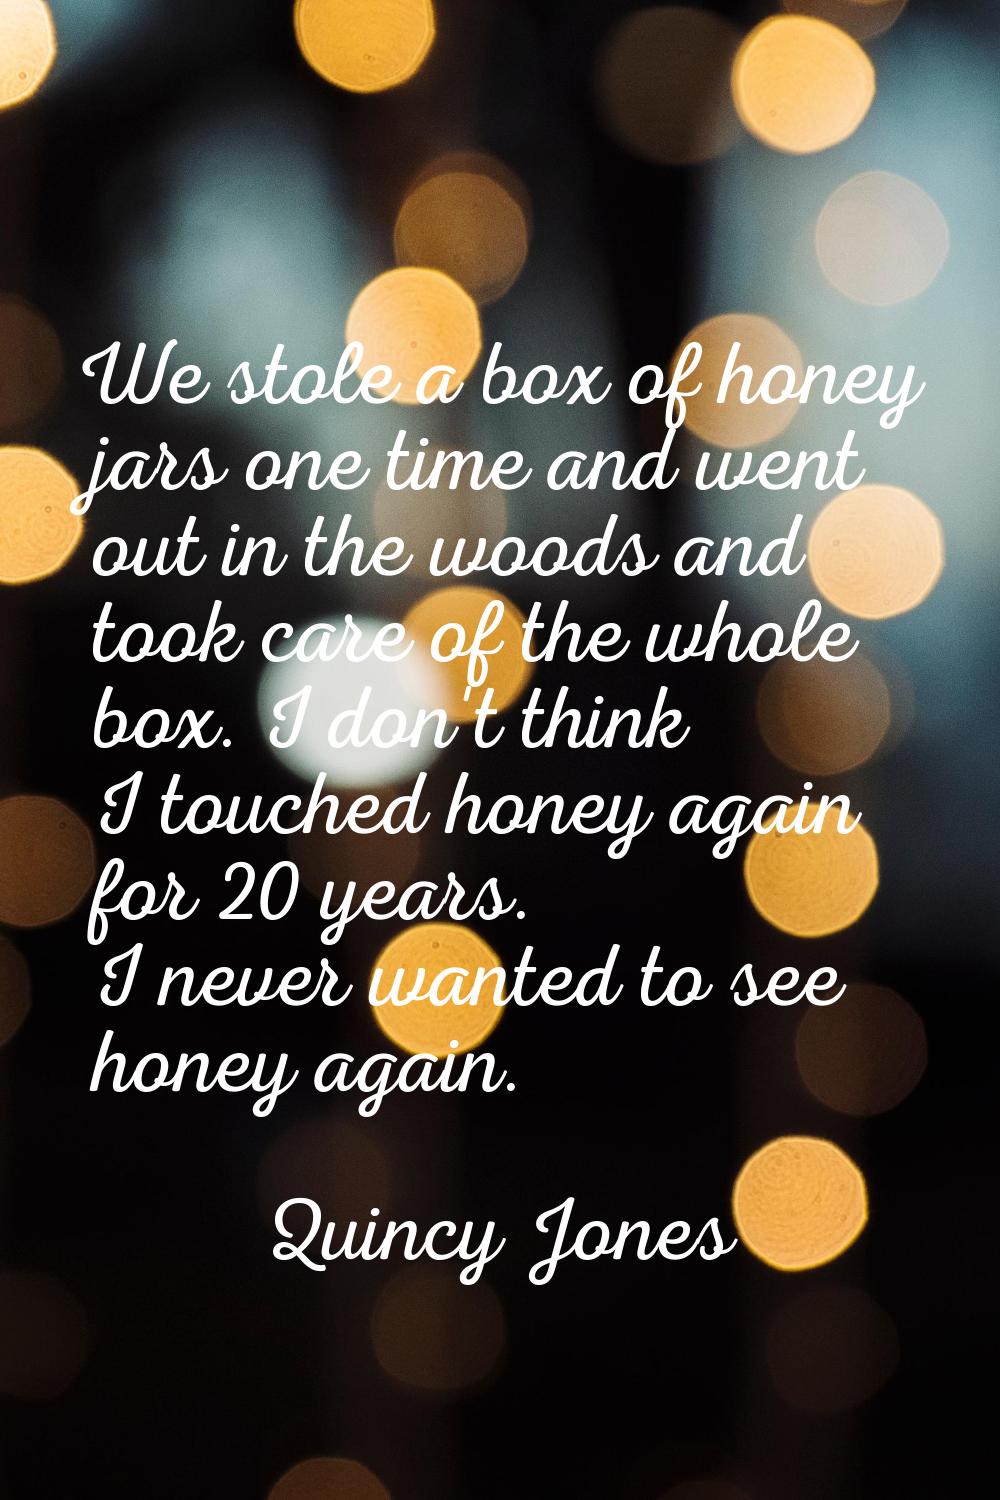 We stole a box of honey jars one time and went out in the woods and took care of the whole box. I d